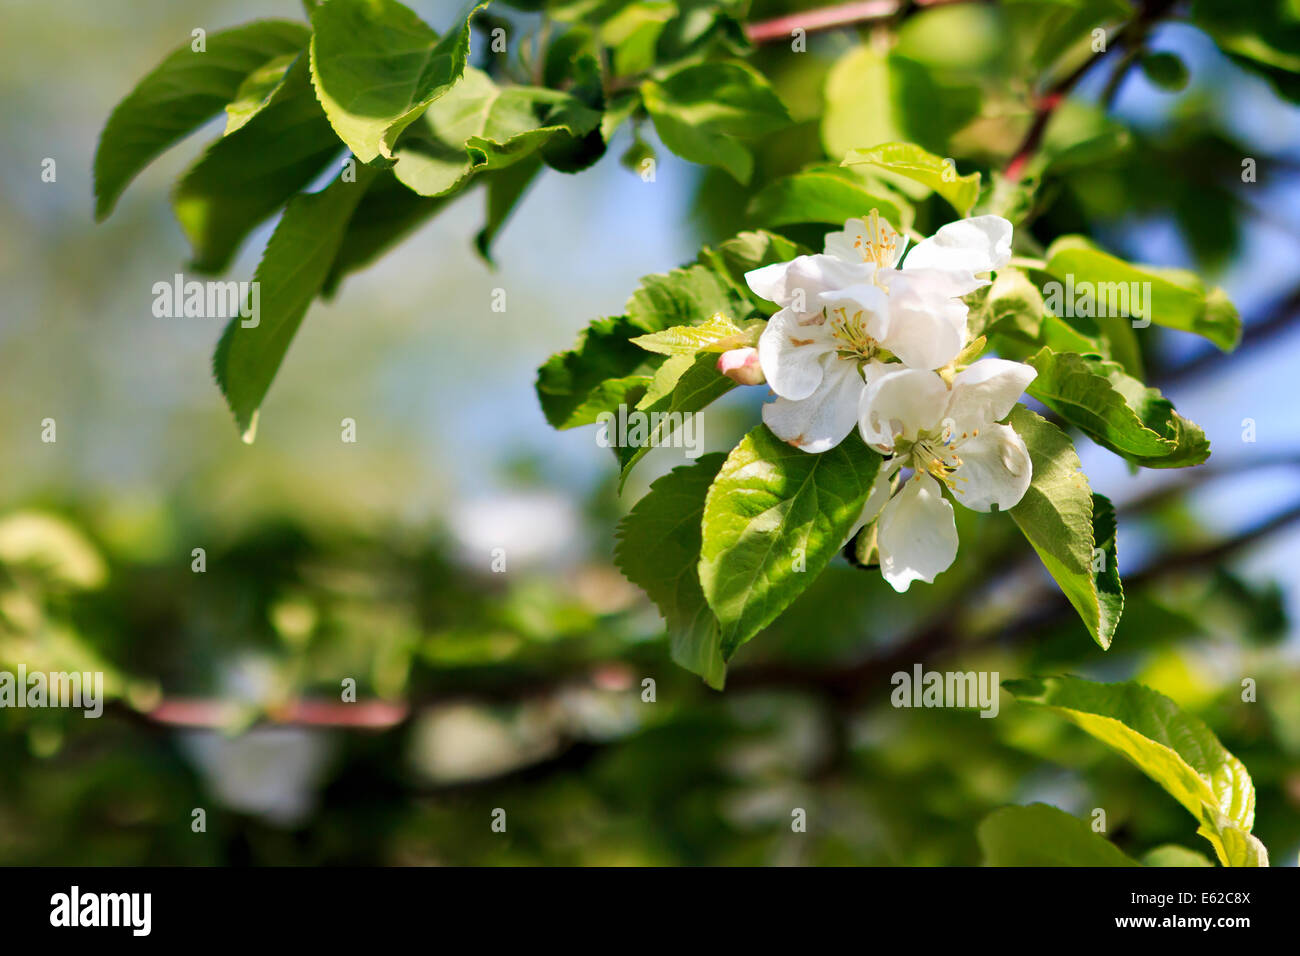 apple blossoms, tree branches Stock Photo